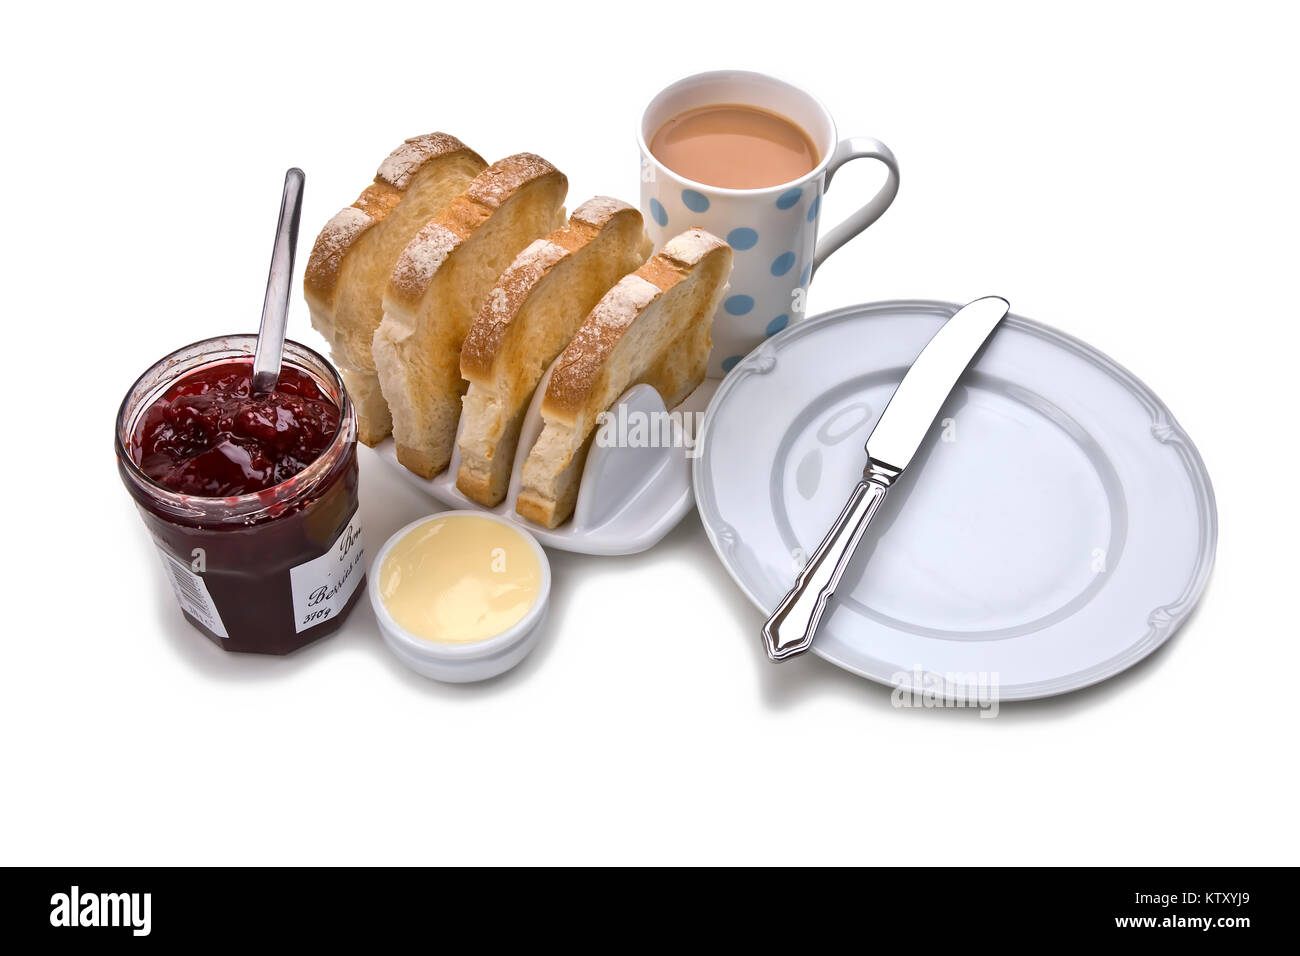 White toast breakfast with ceramic toast rack, butter; red jam, mug of tea, serving plate and knife on white background Stock Photo